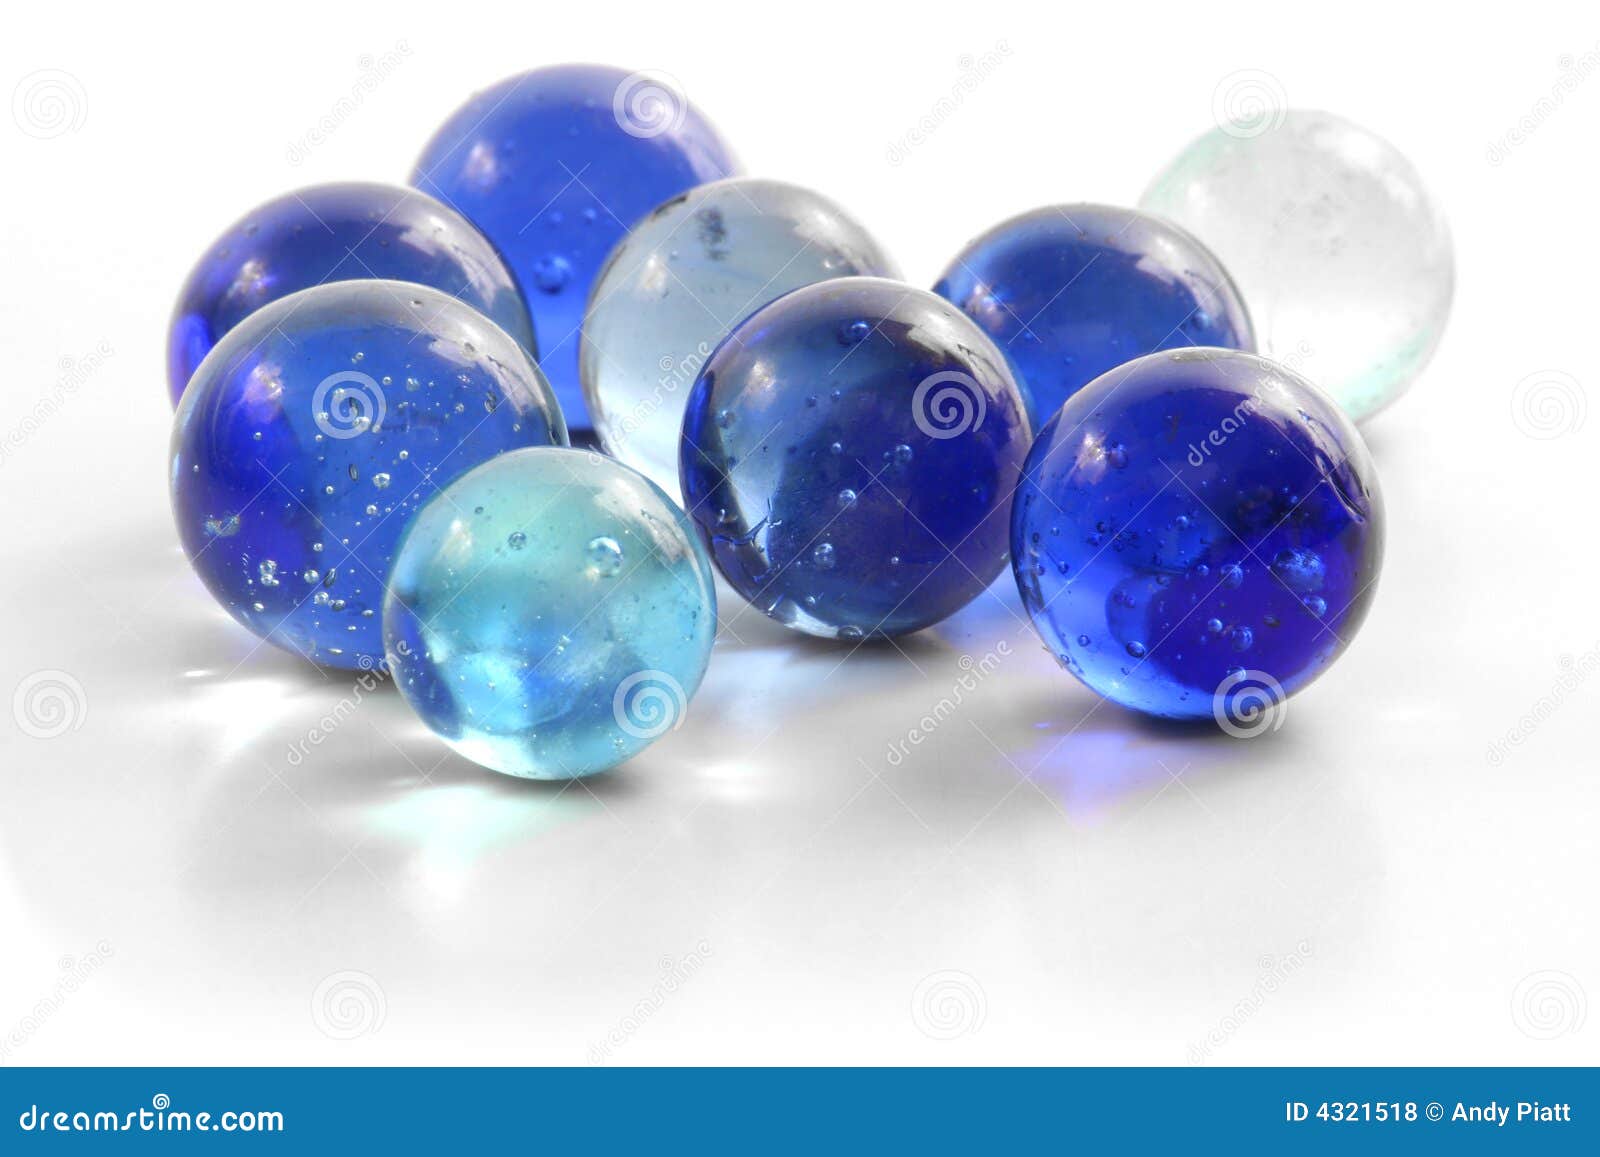 handful of marbles